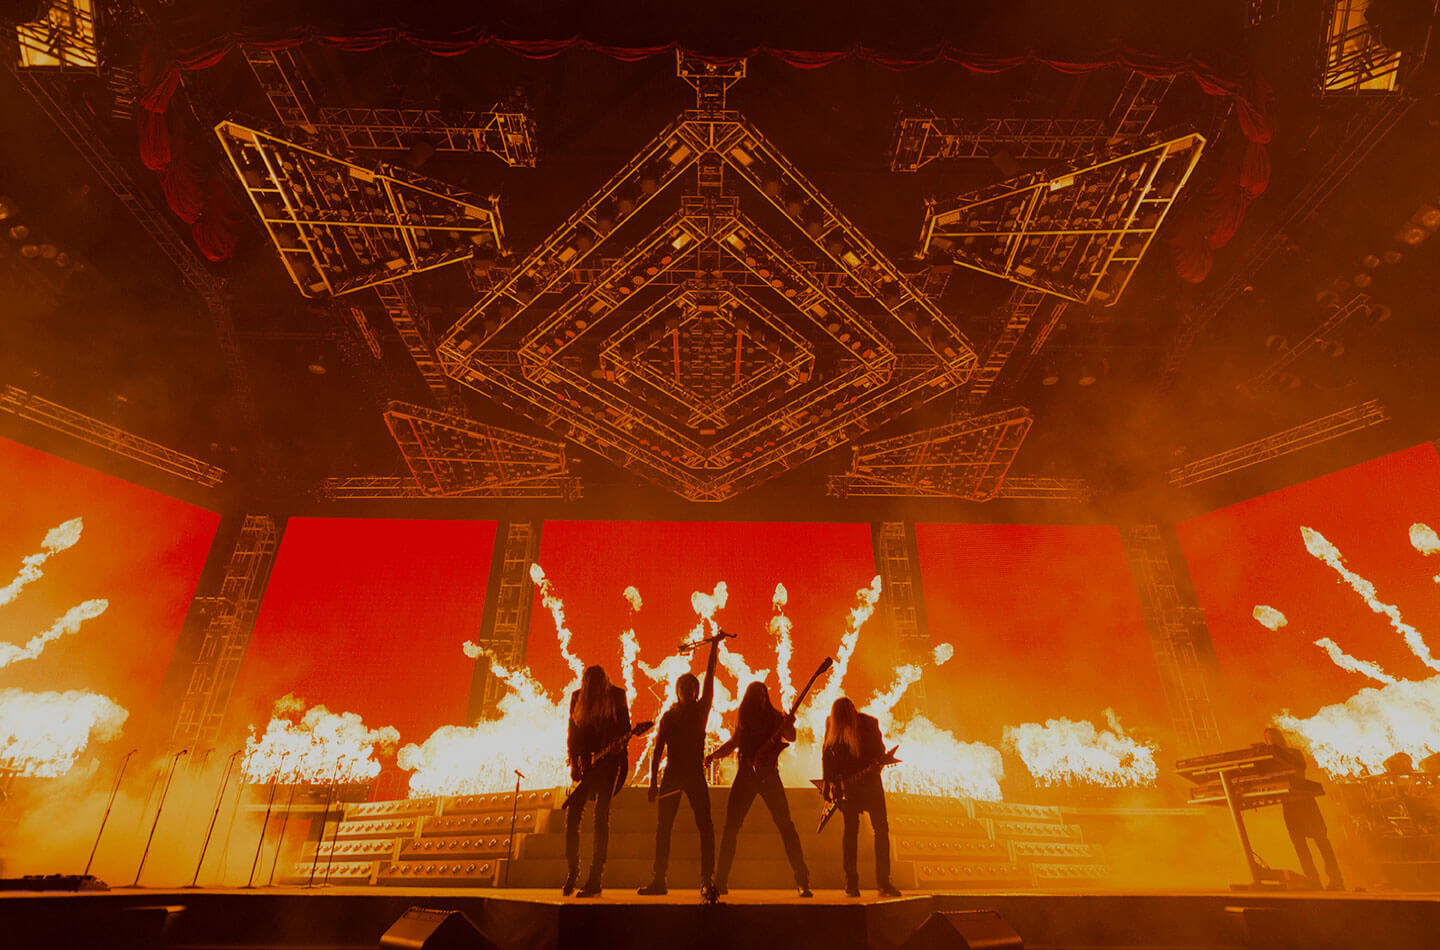 17 Facts About Trans-Siberian Orchestra Concert - Facts.net